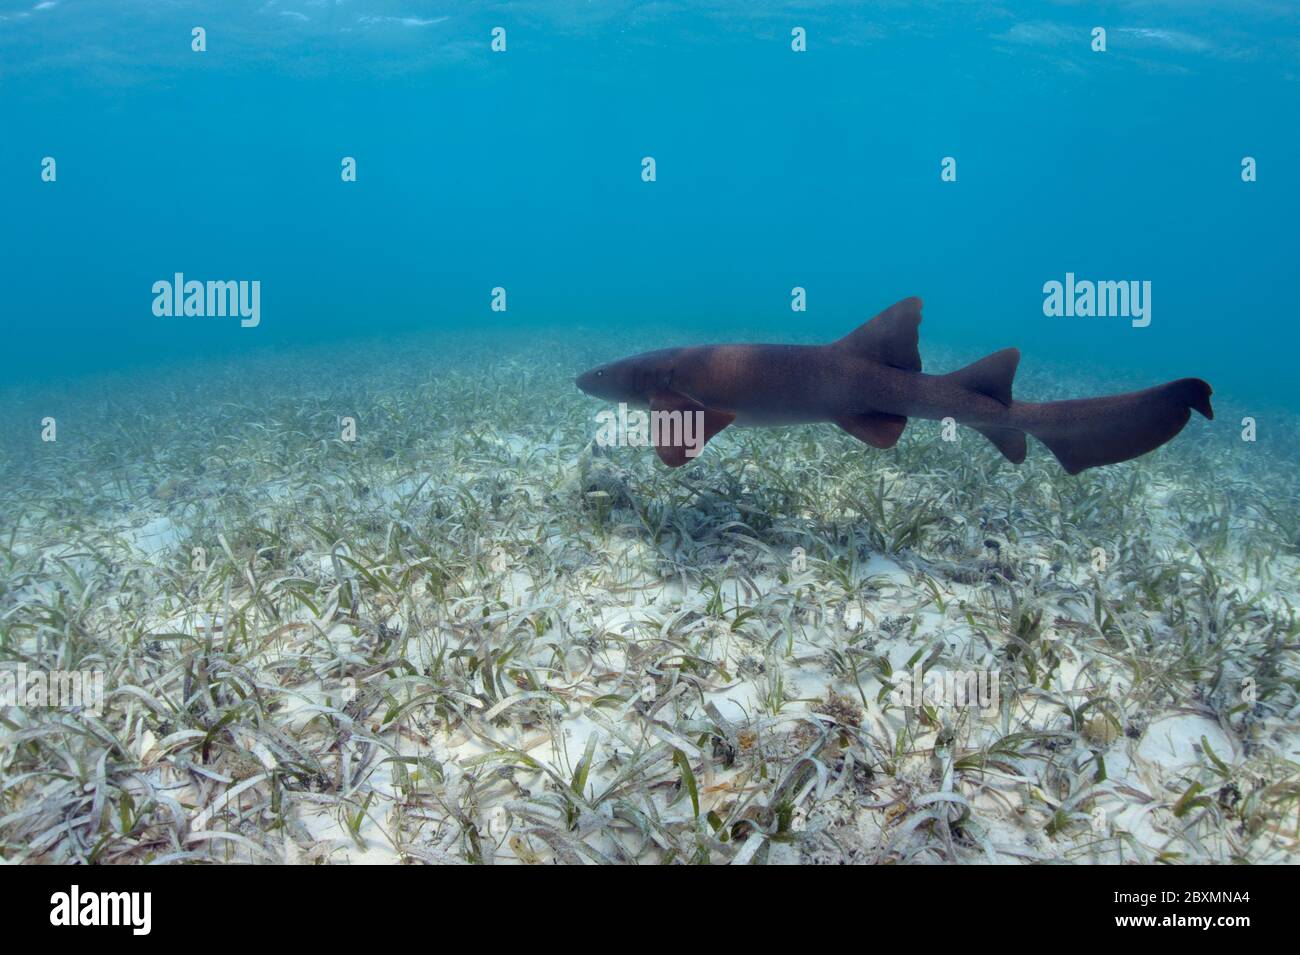 The nurse shark (Ginglymostoma cirratum) is swimming over the seagrass meadow at Silky Caye, Belize. Stock Photo